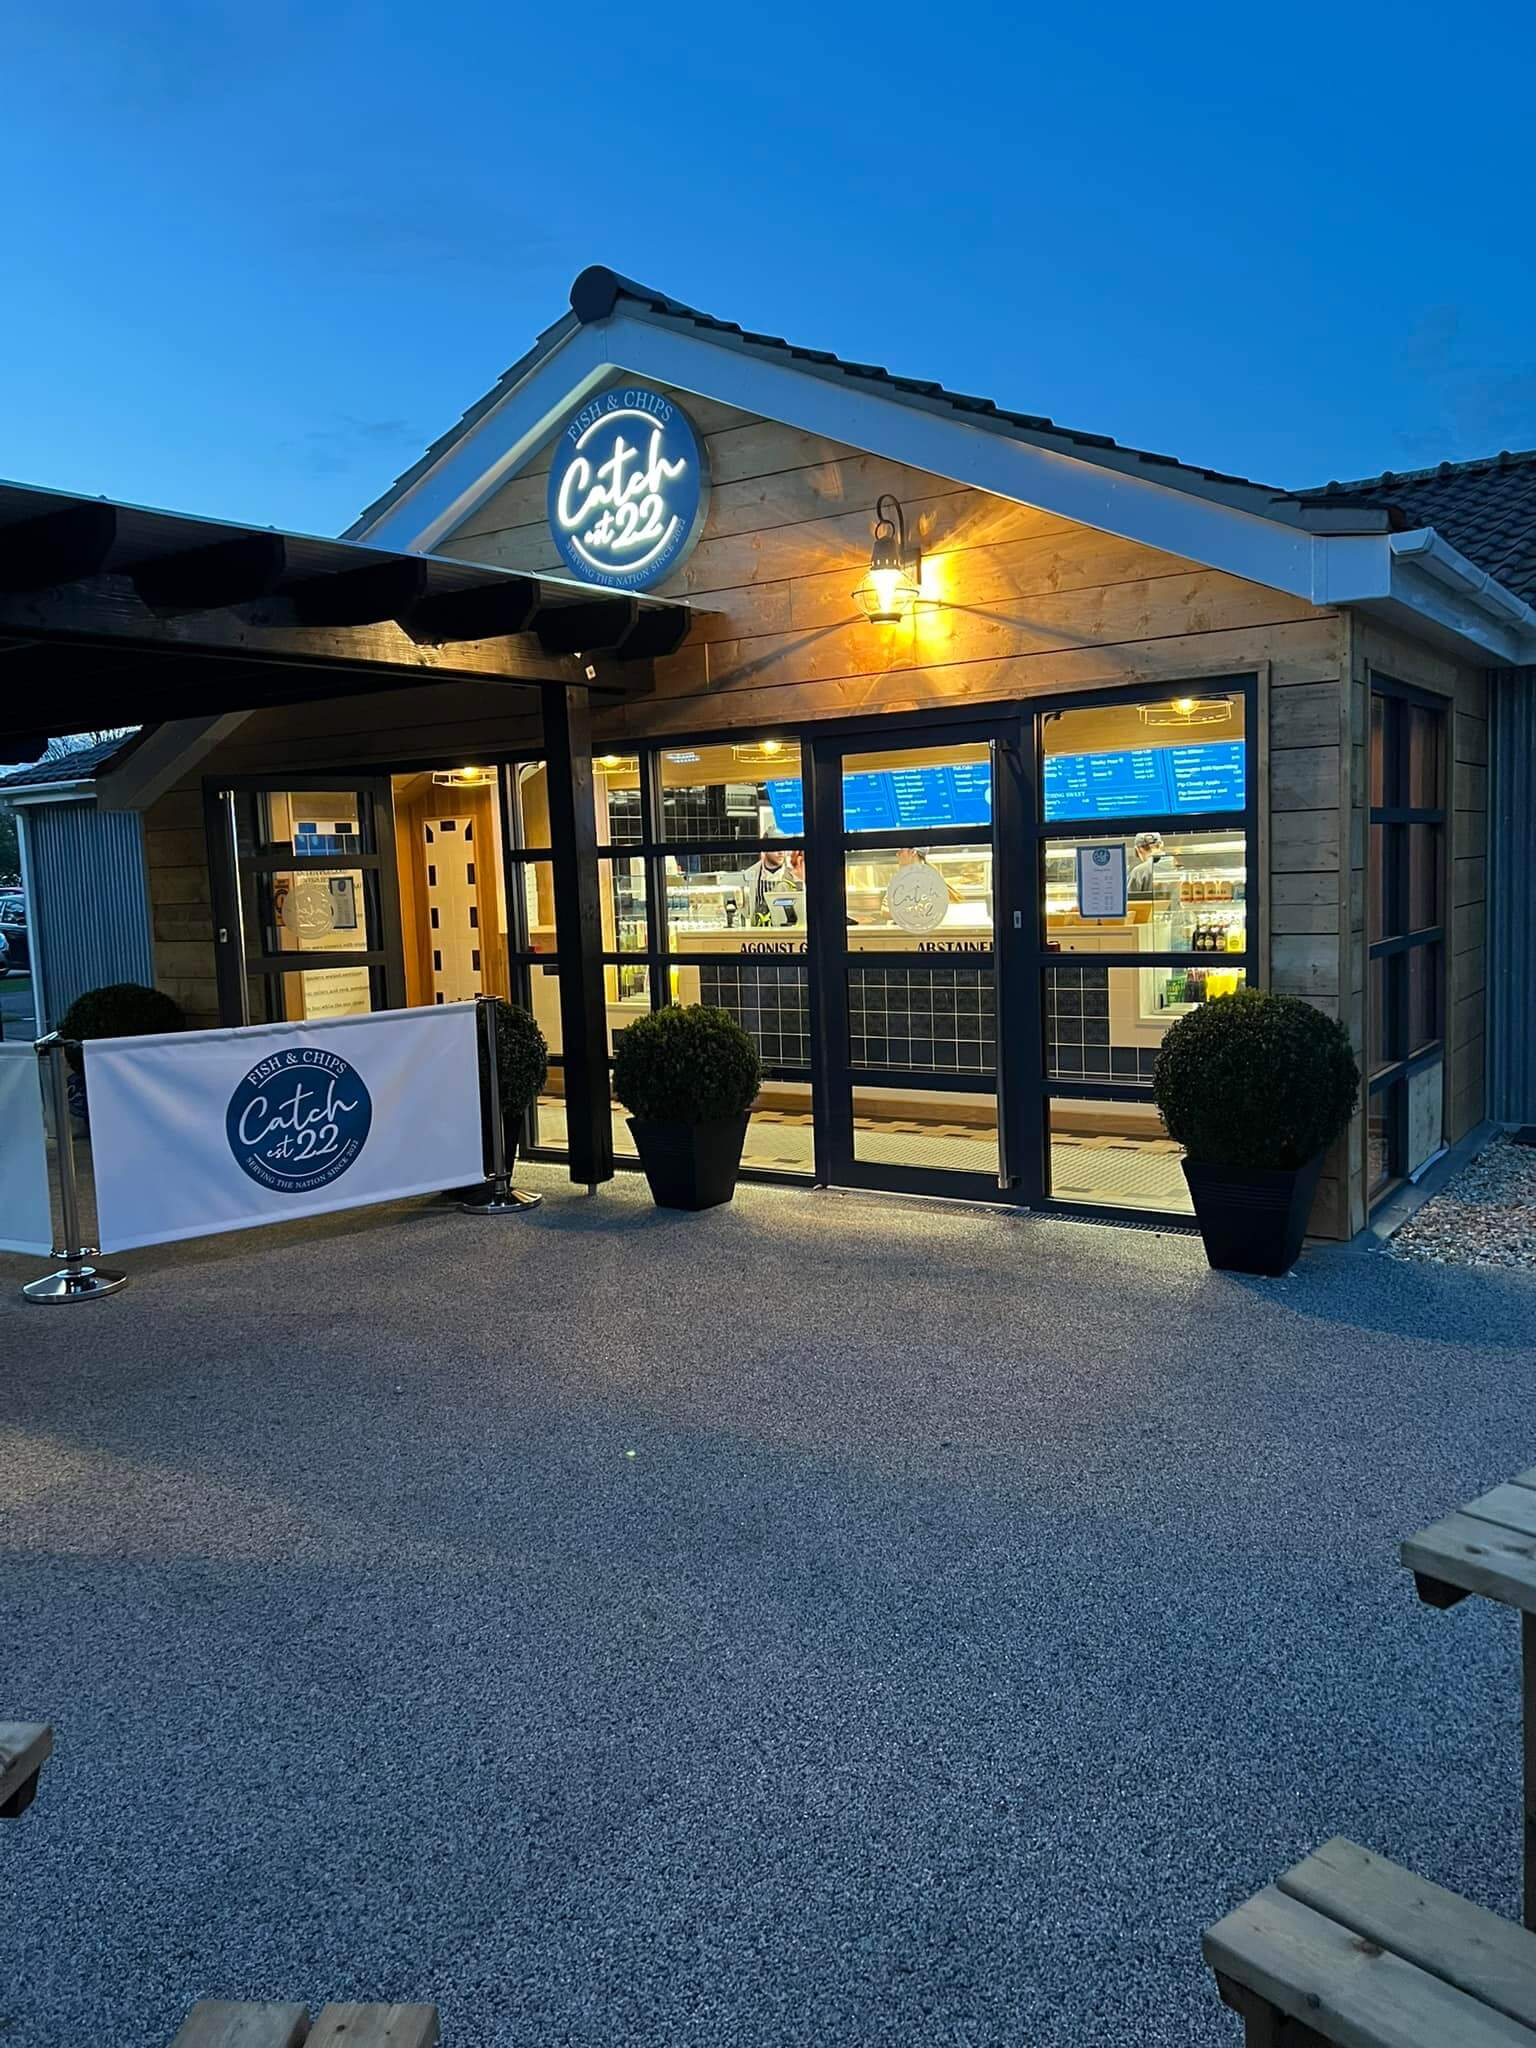 Catch 22 fish and chips shop is one of the facilities at Tattershall Lakes